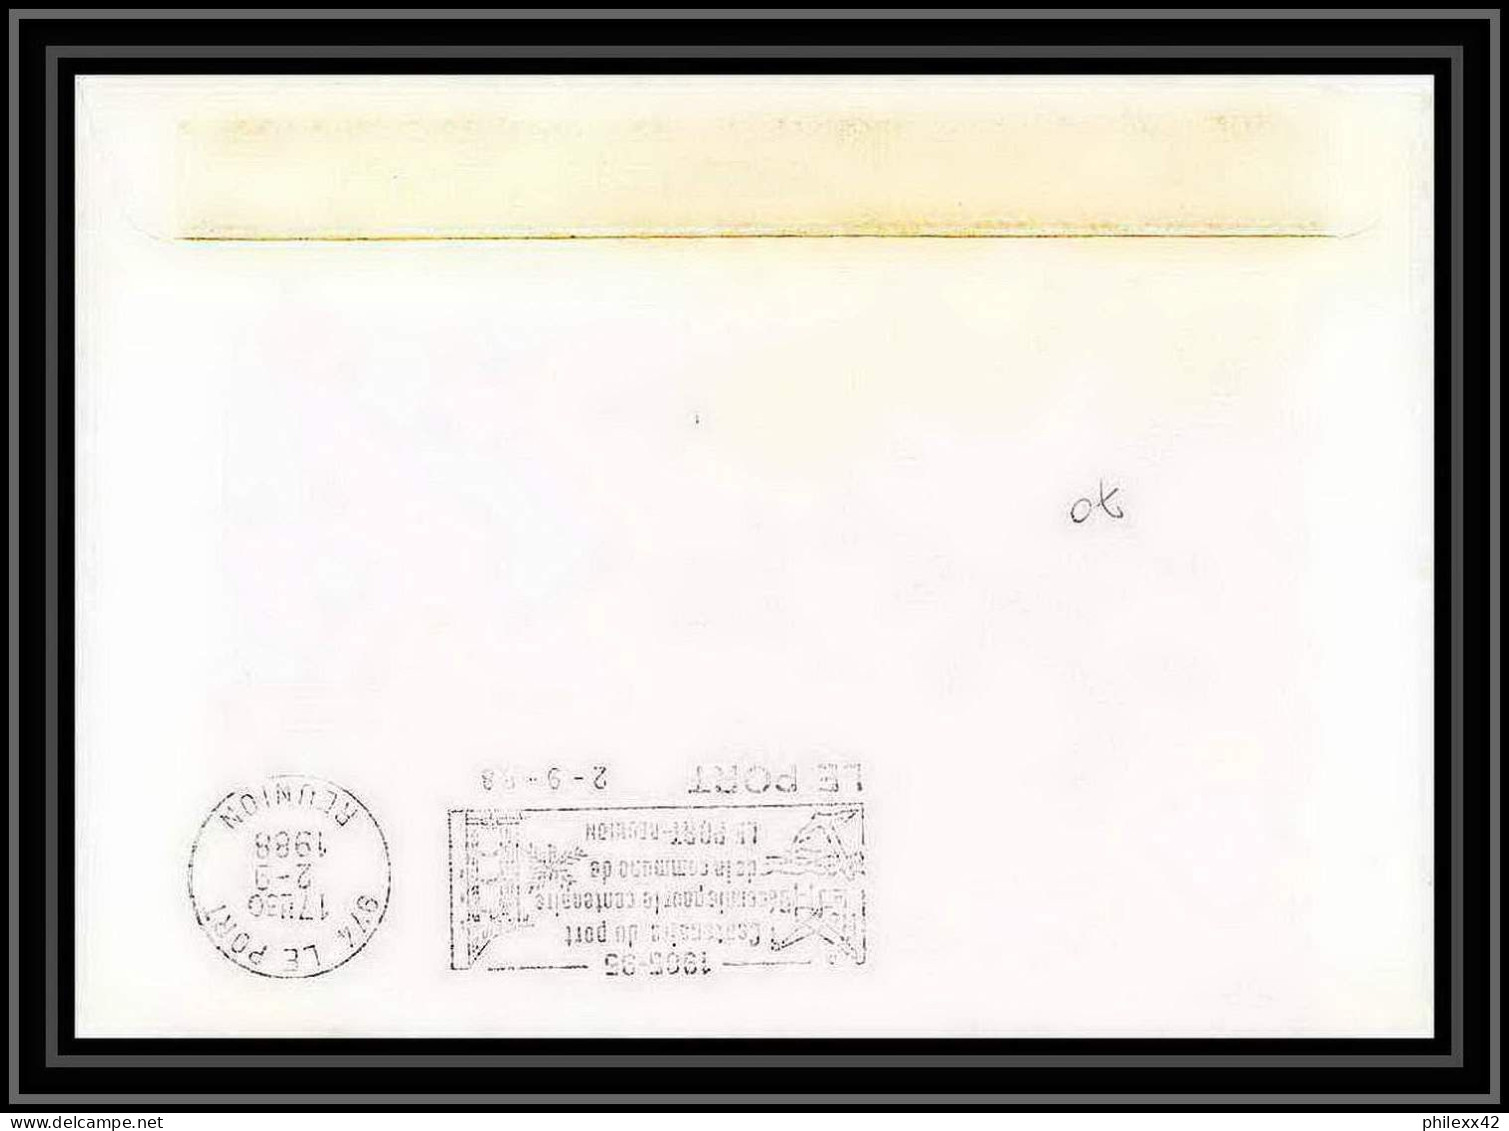 1568 TAAF Terres Australes Lettre (cover) Md 59 Fournaise La Reunion Signé Signed Marion Dufresne 2/9/1988 Obl Paquebot  - Antarktis-Expeditionen